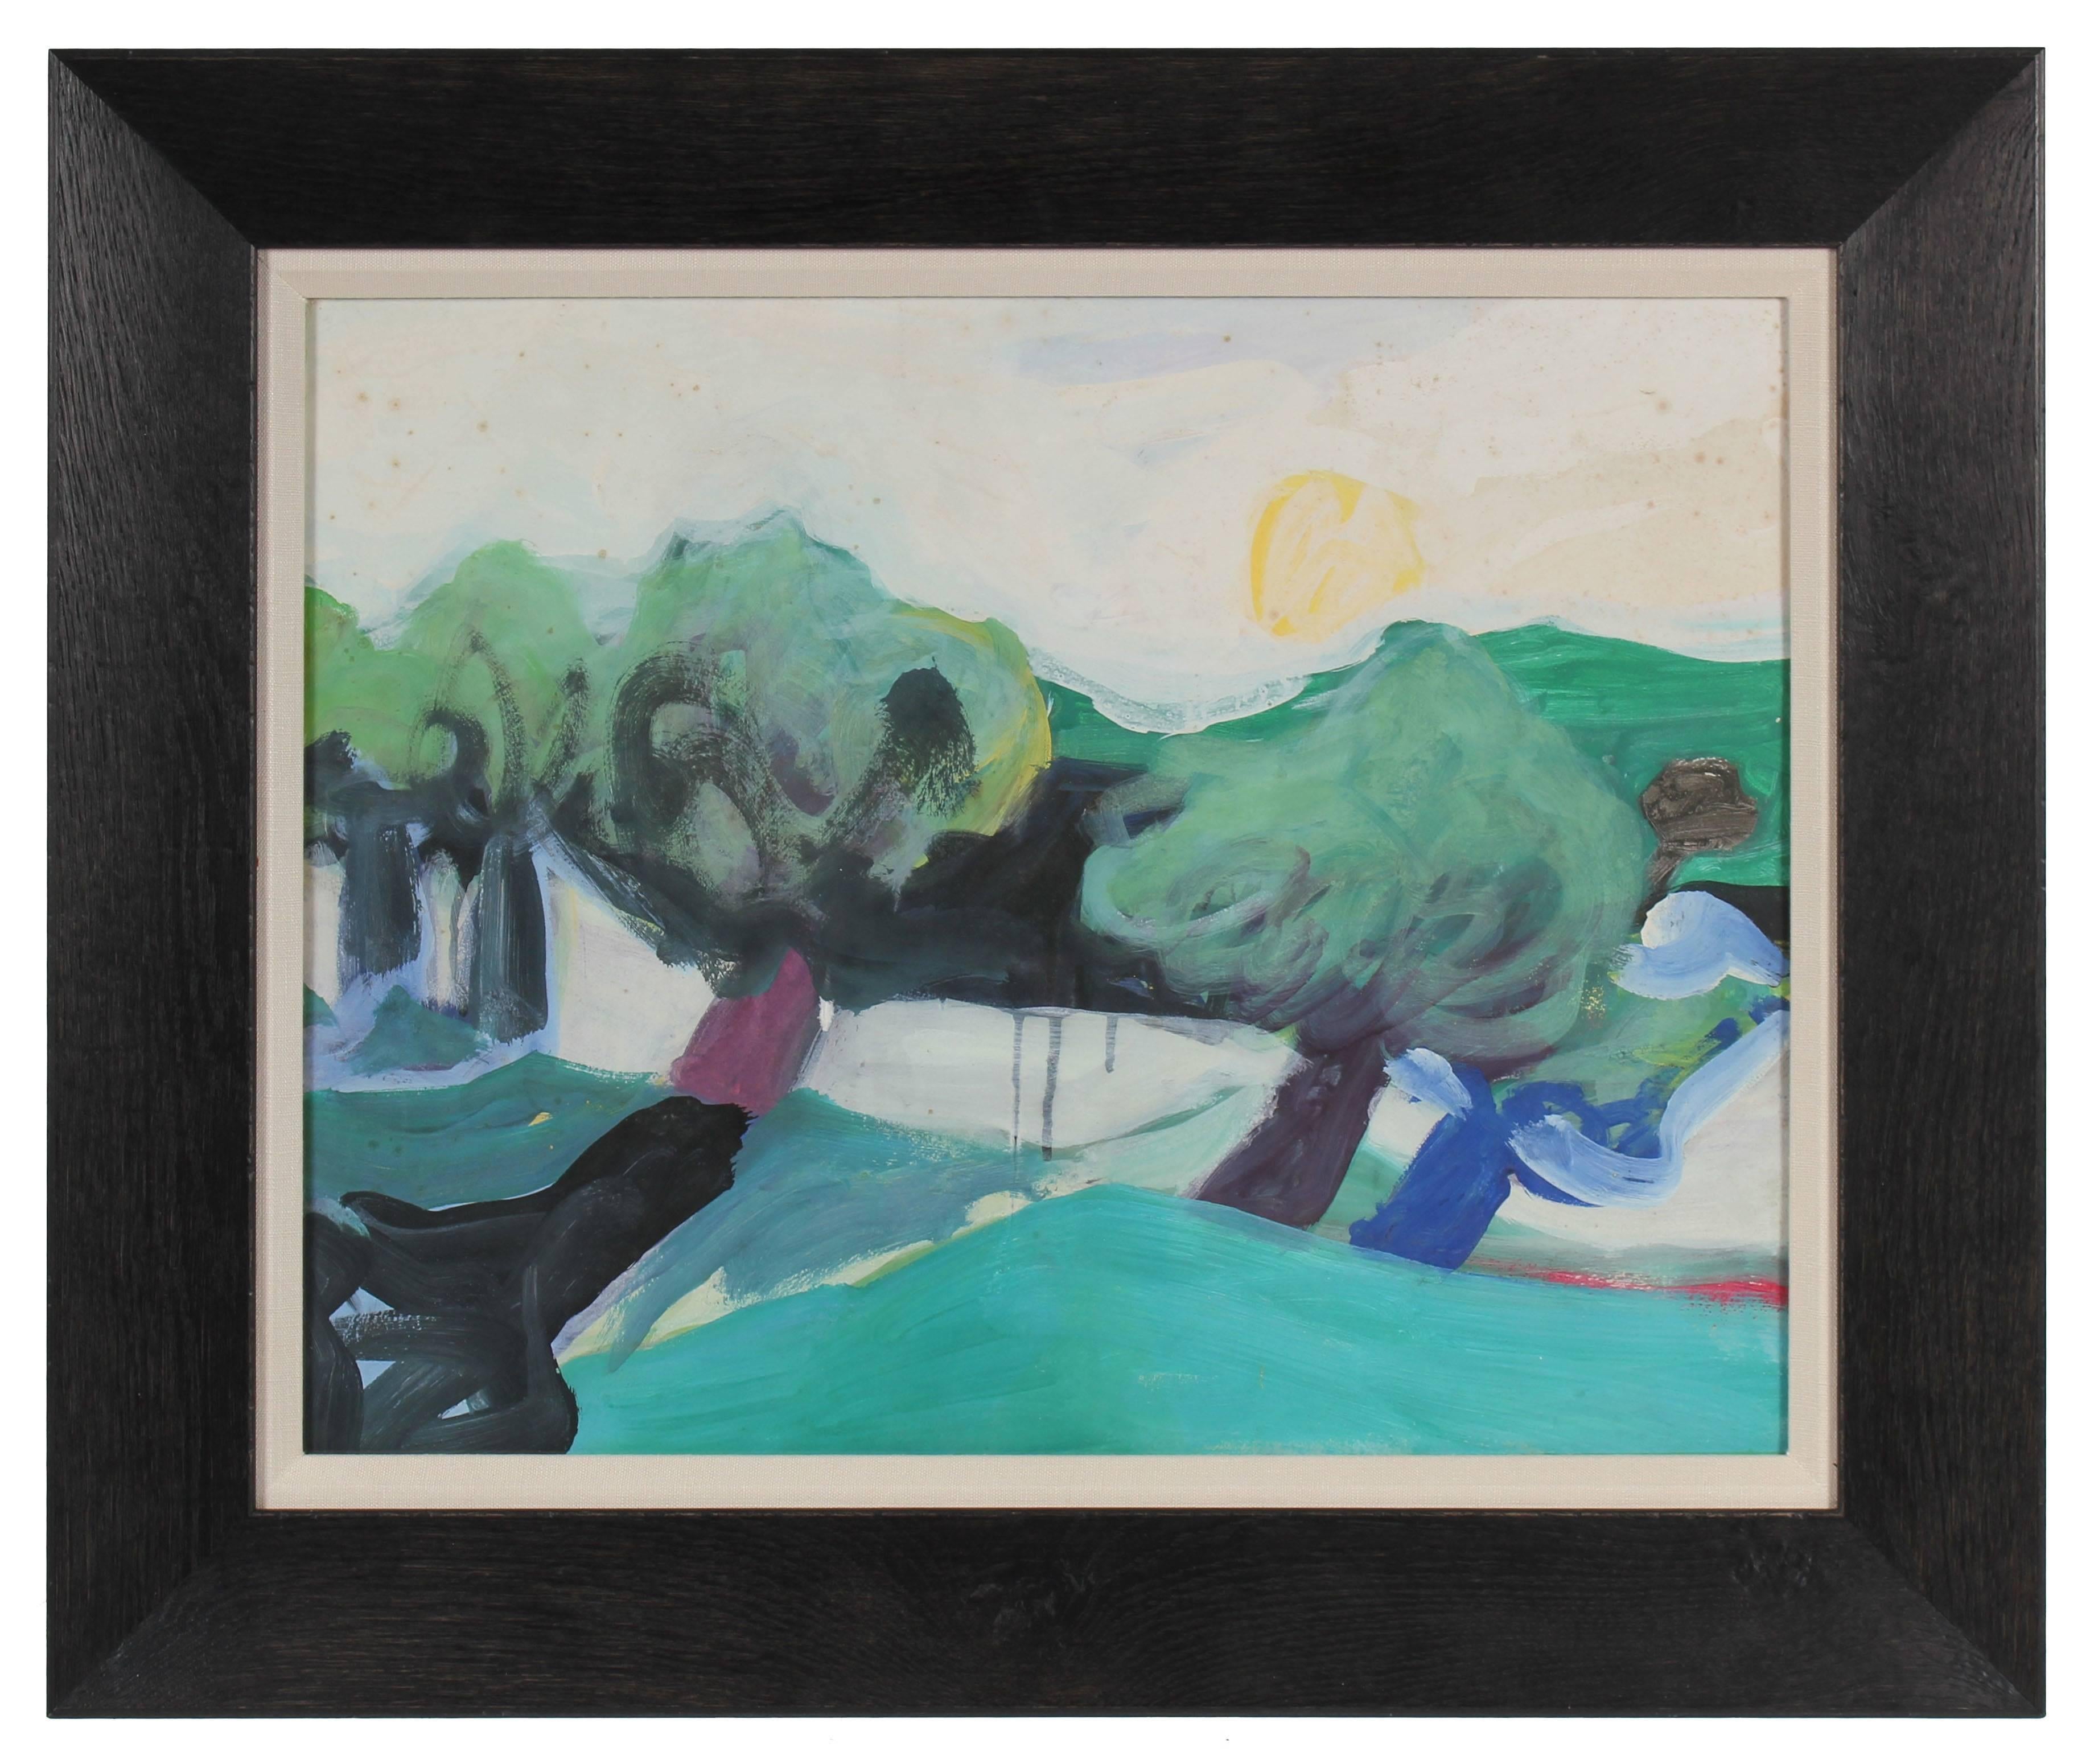 Jane Rades Landscape Painting - Modernist Landscape with Trees, Oil on Paper, Circa 1980